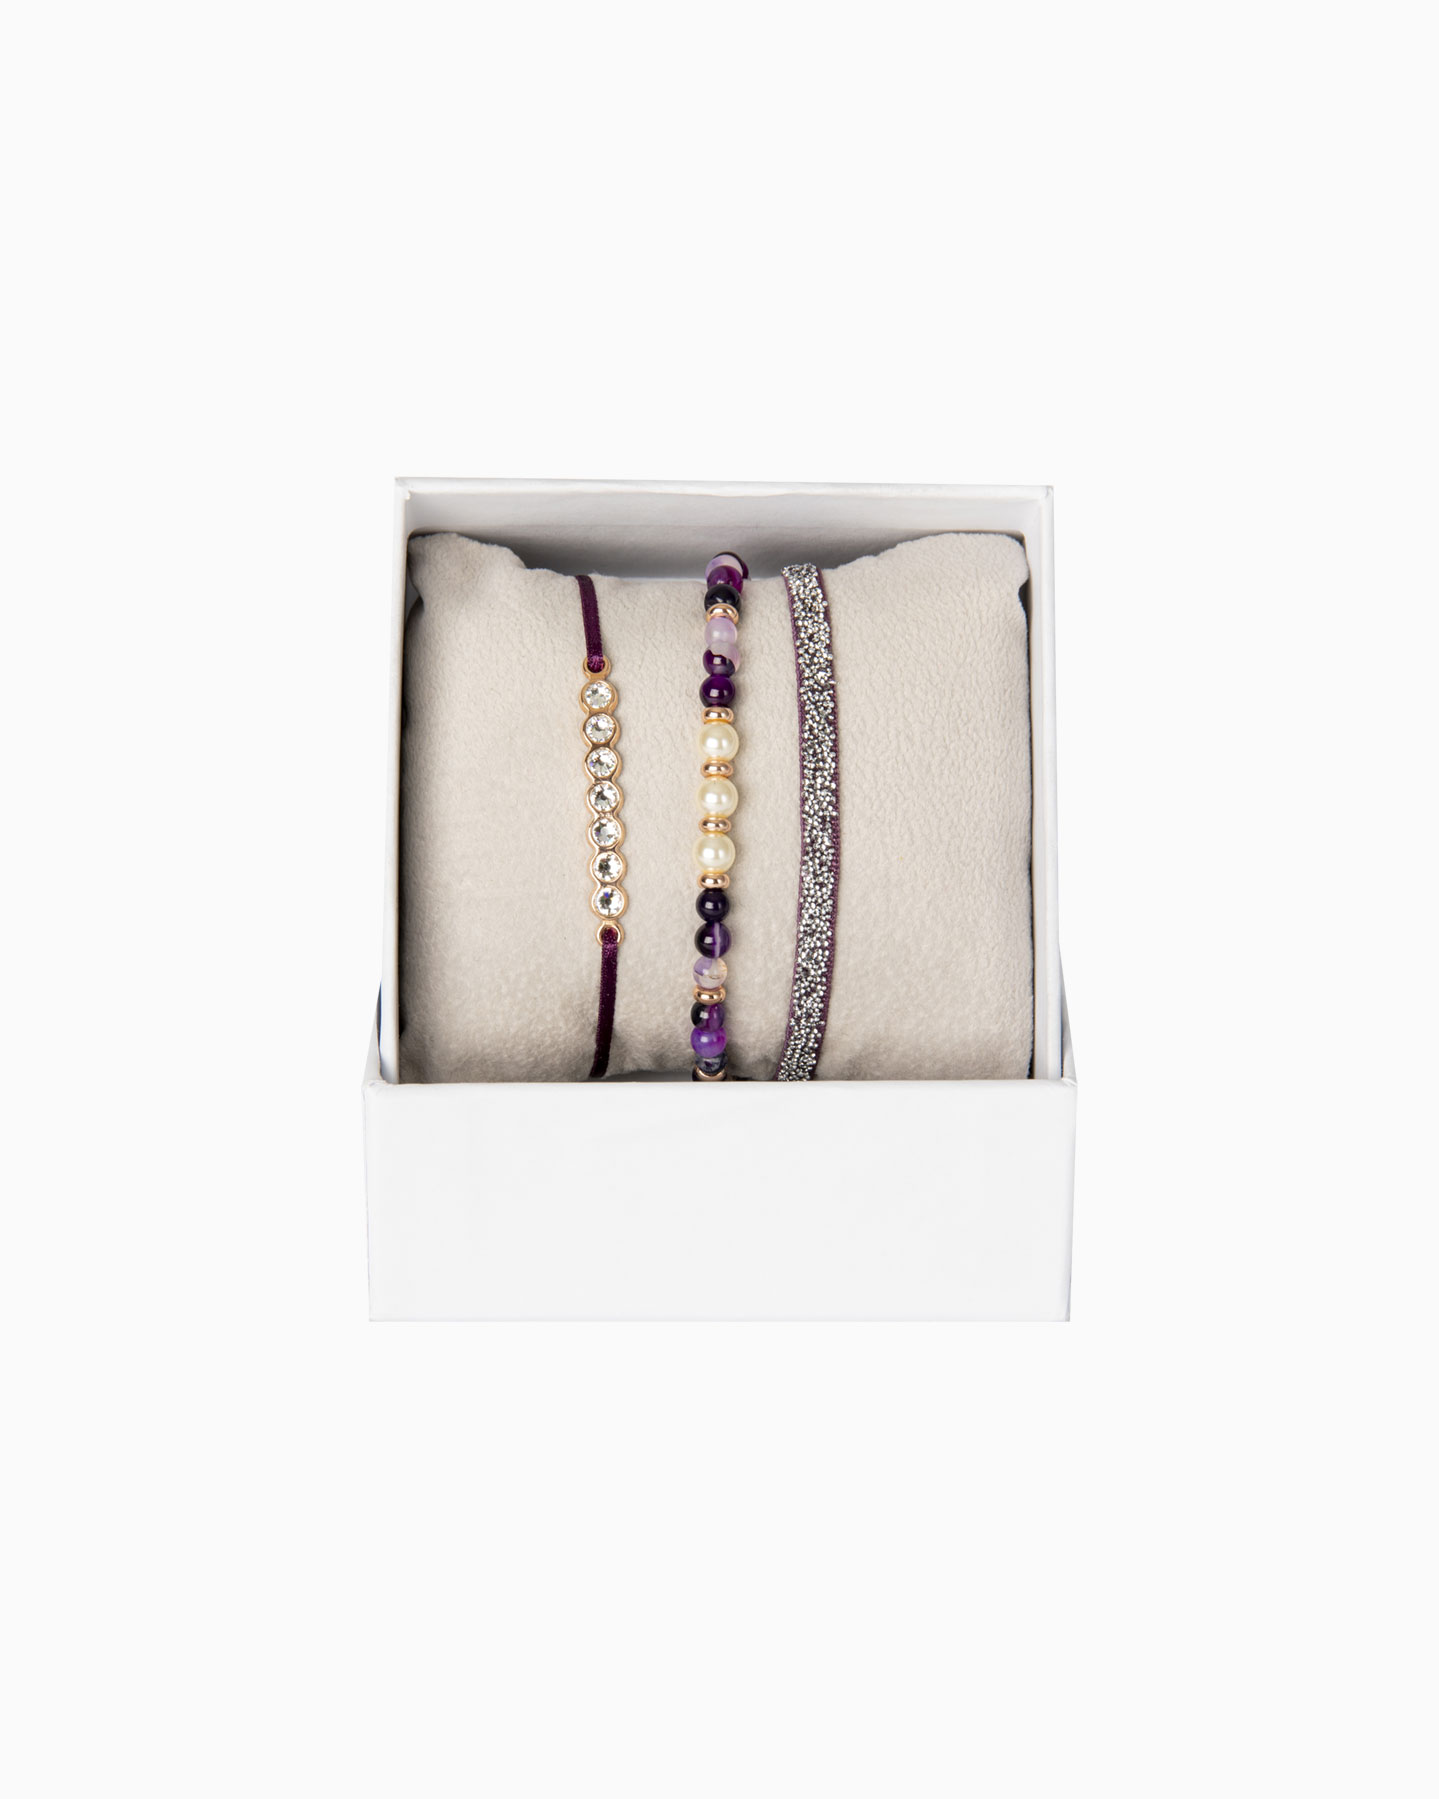 Strass Box Edition Limitée Rainbow - Violet Fonce - Or Rose